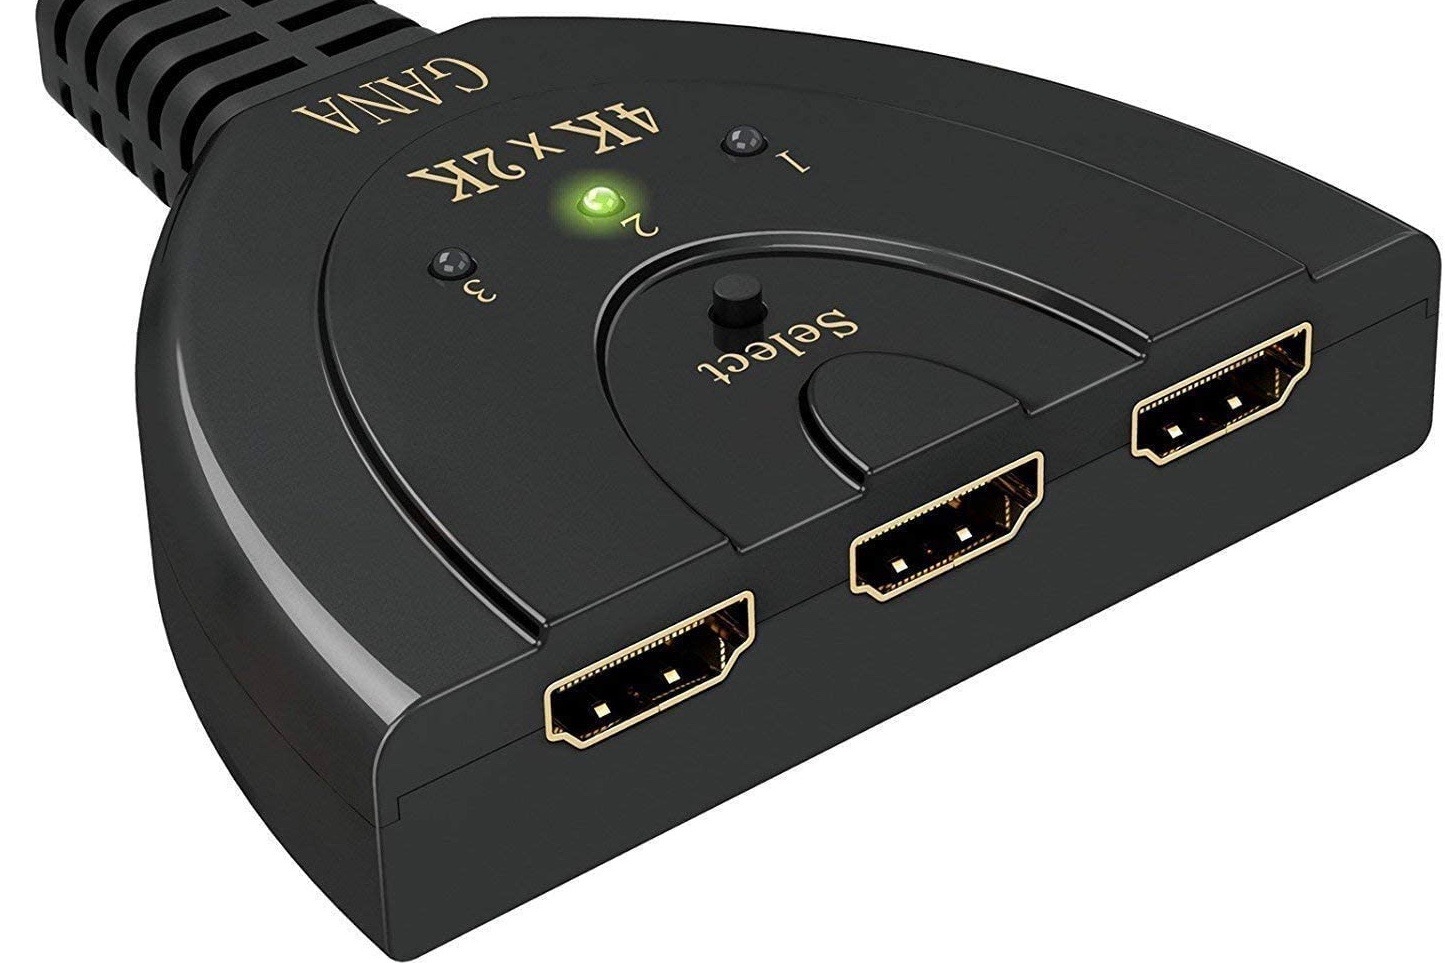 MT-ViKI HDMI Switch 5x1 5 Port HDMI Switcher Box with IR Wireless Remote  Control Support 4Kx2K Ultra HD 3D 1080P and USB Power Cable : :  Electronics